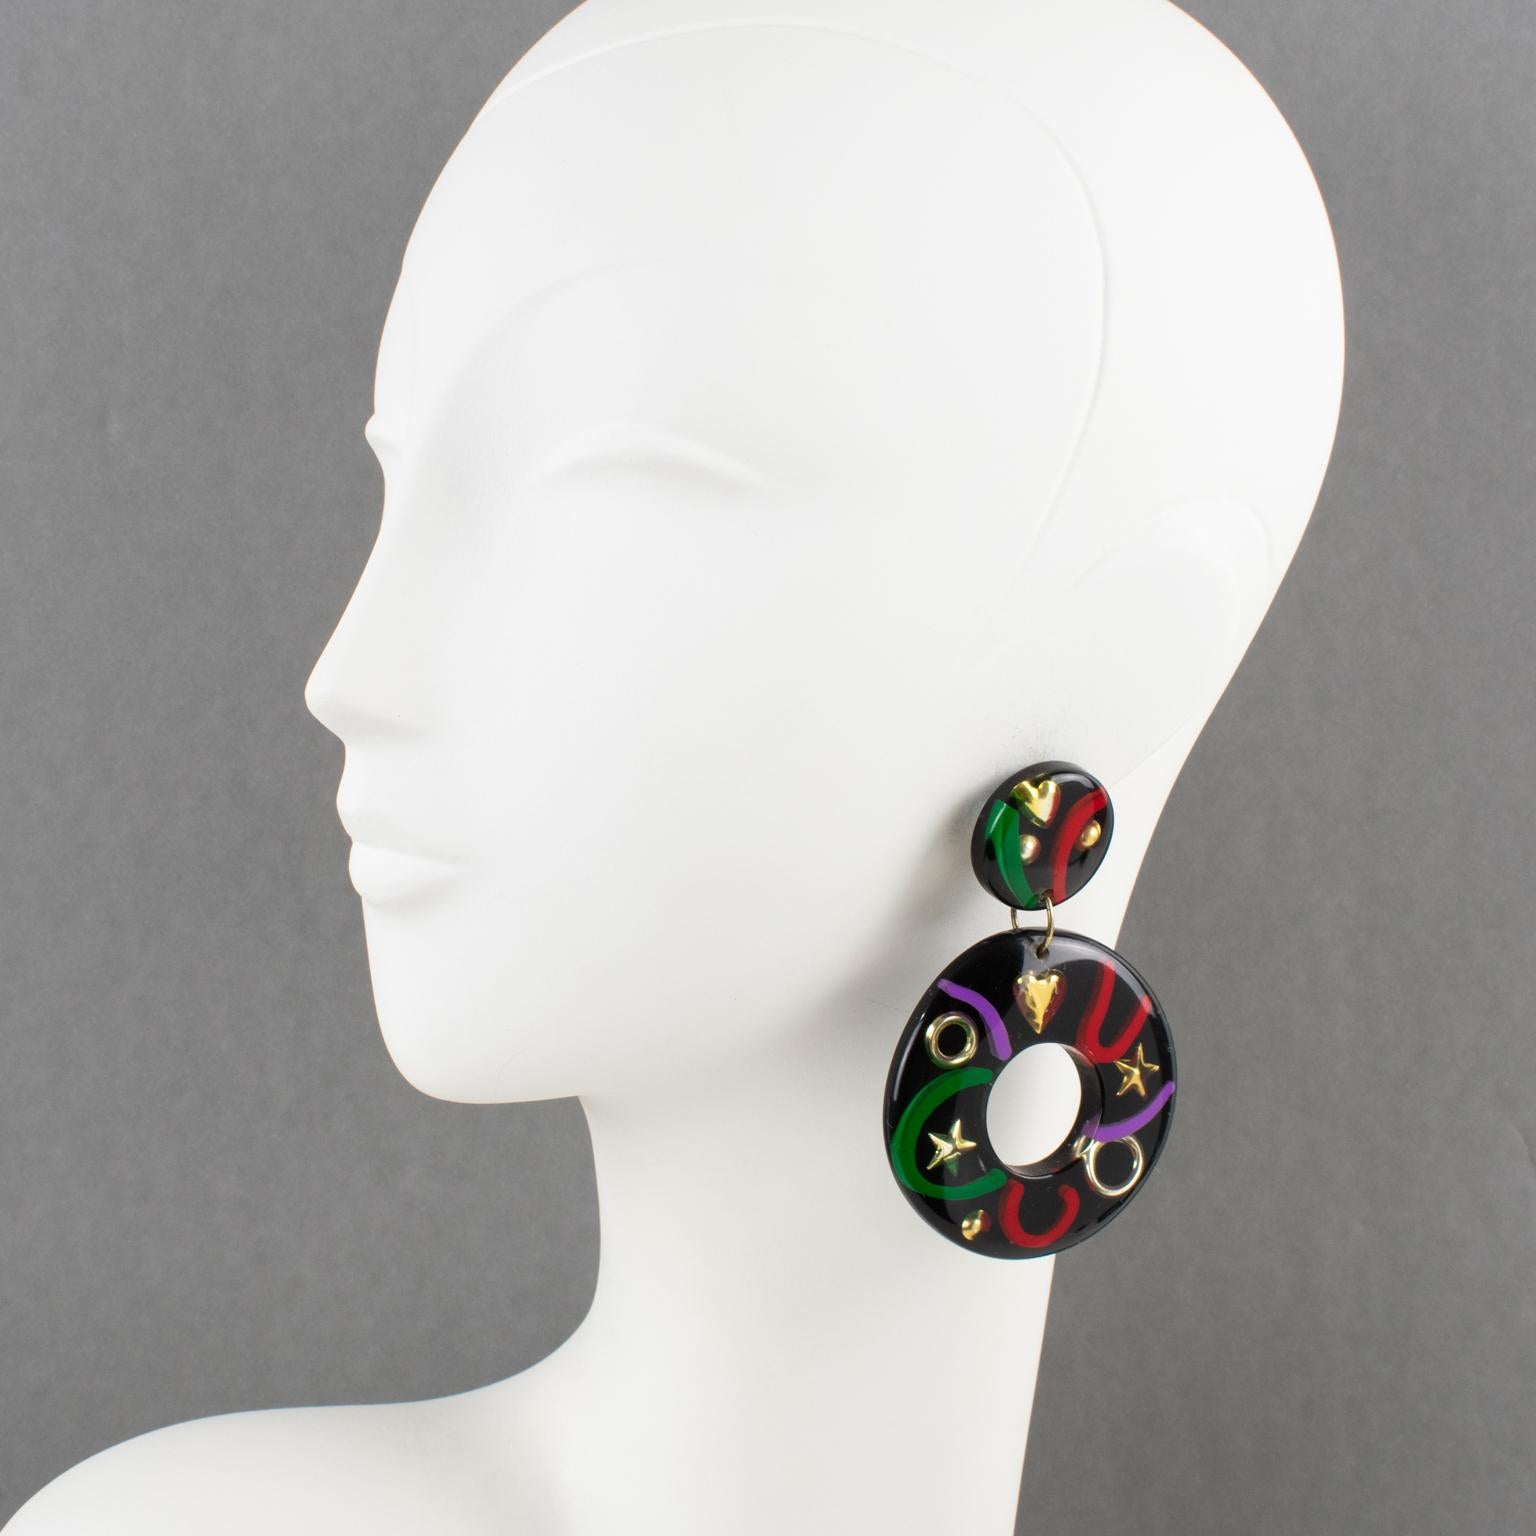 These lovely Lucite or Resin dangling clip-on earrings were made in Italy. They feature an oversized donut shape in true licorice black color with gilded heart, star, and ring inclusions, complimented with green, purple, and red 